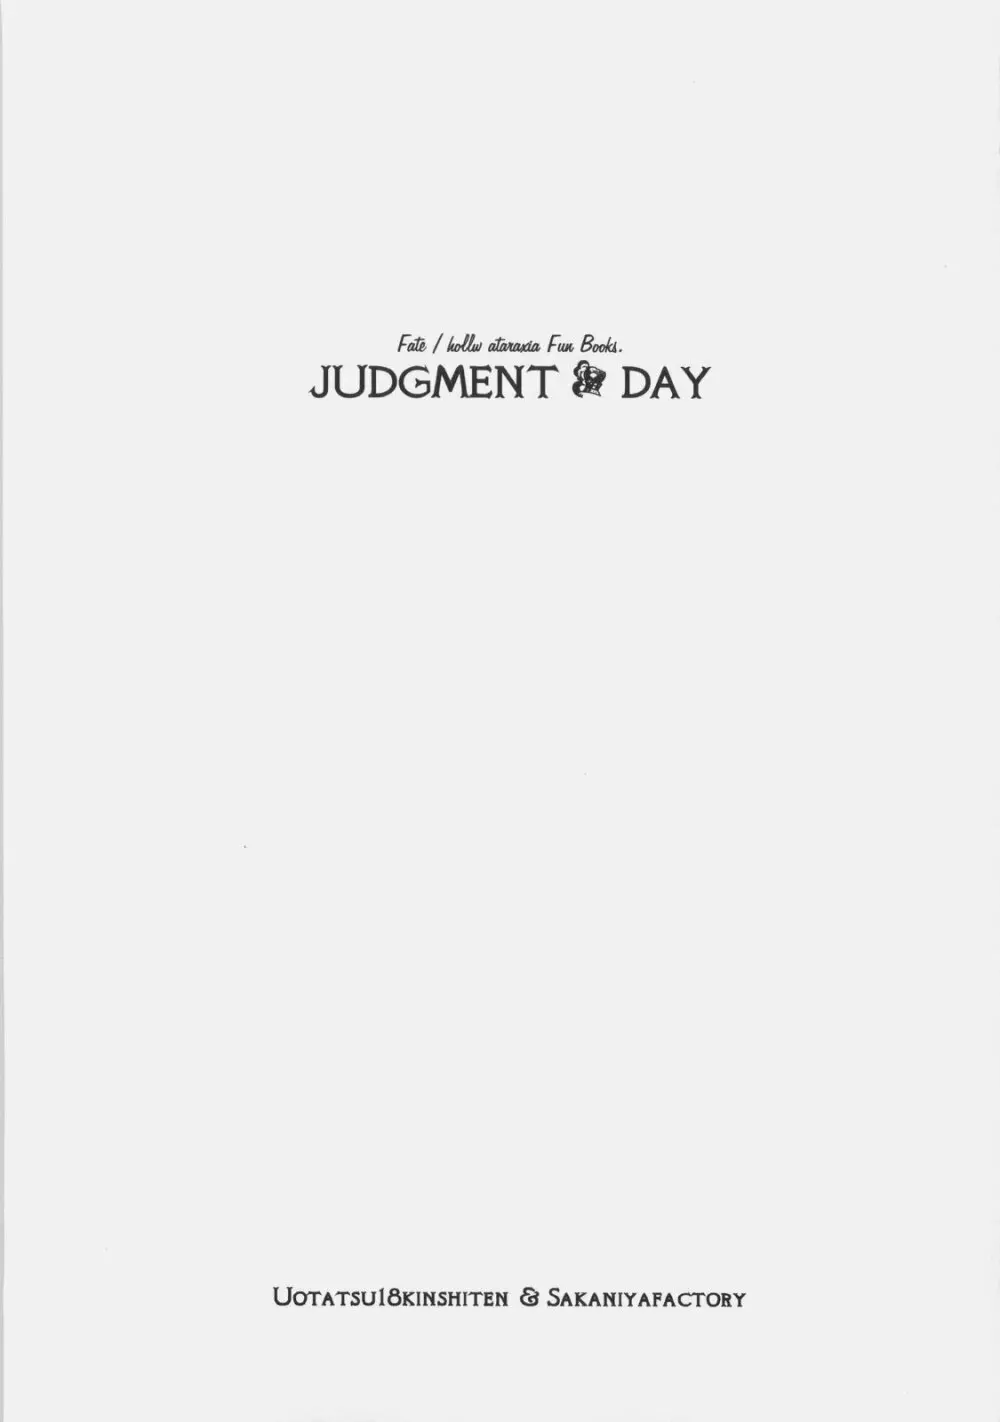 JUDGMENT DAY Page.2